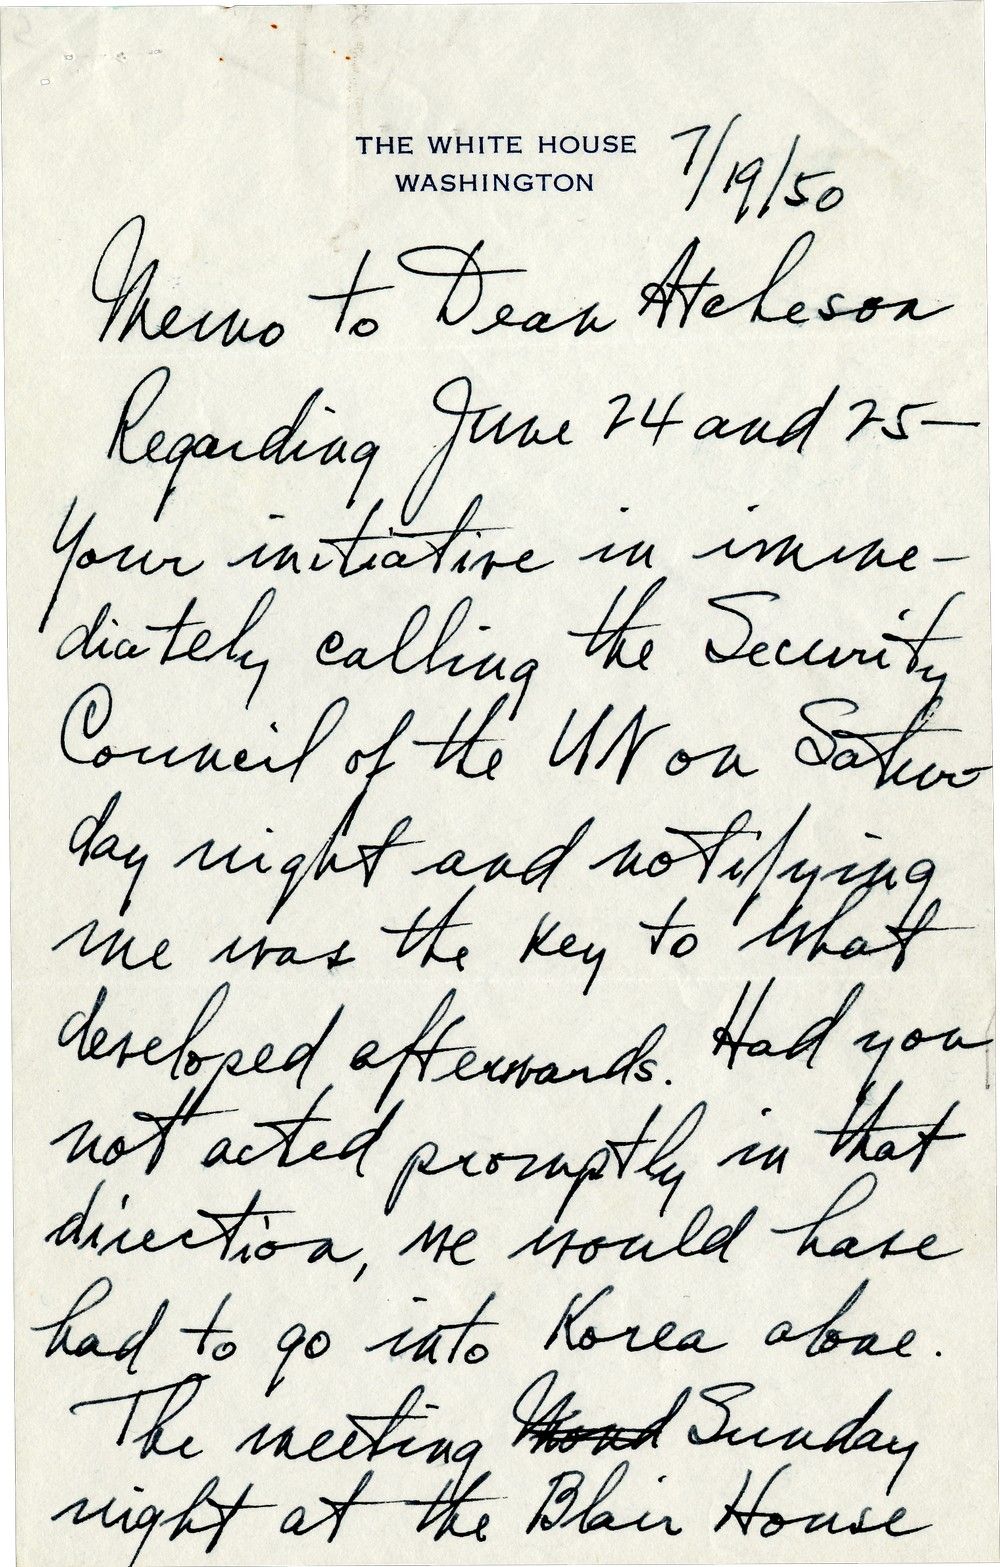 A Historic Memo: Harry Truman Salutes Dean Acheson's Crucial Role in Going to War With Korea